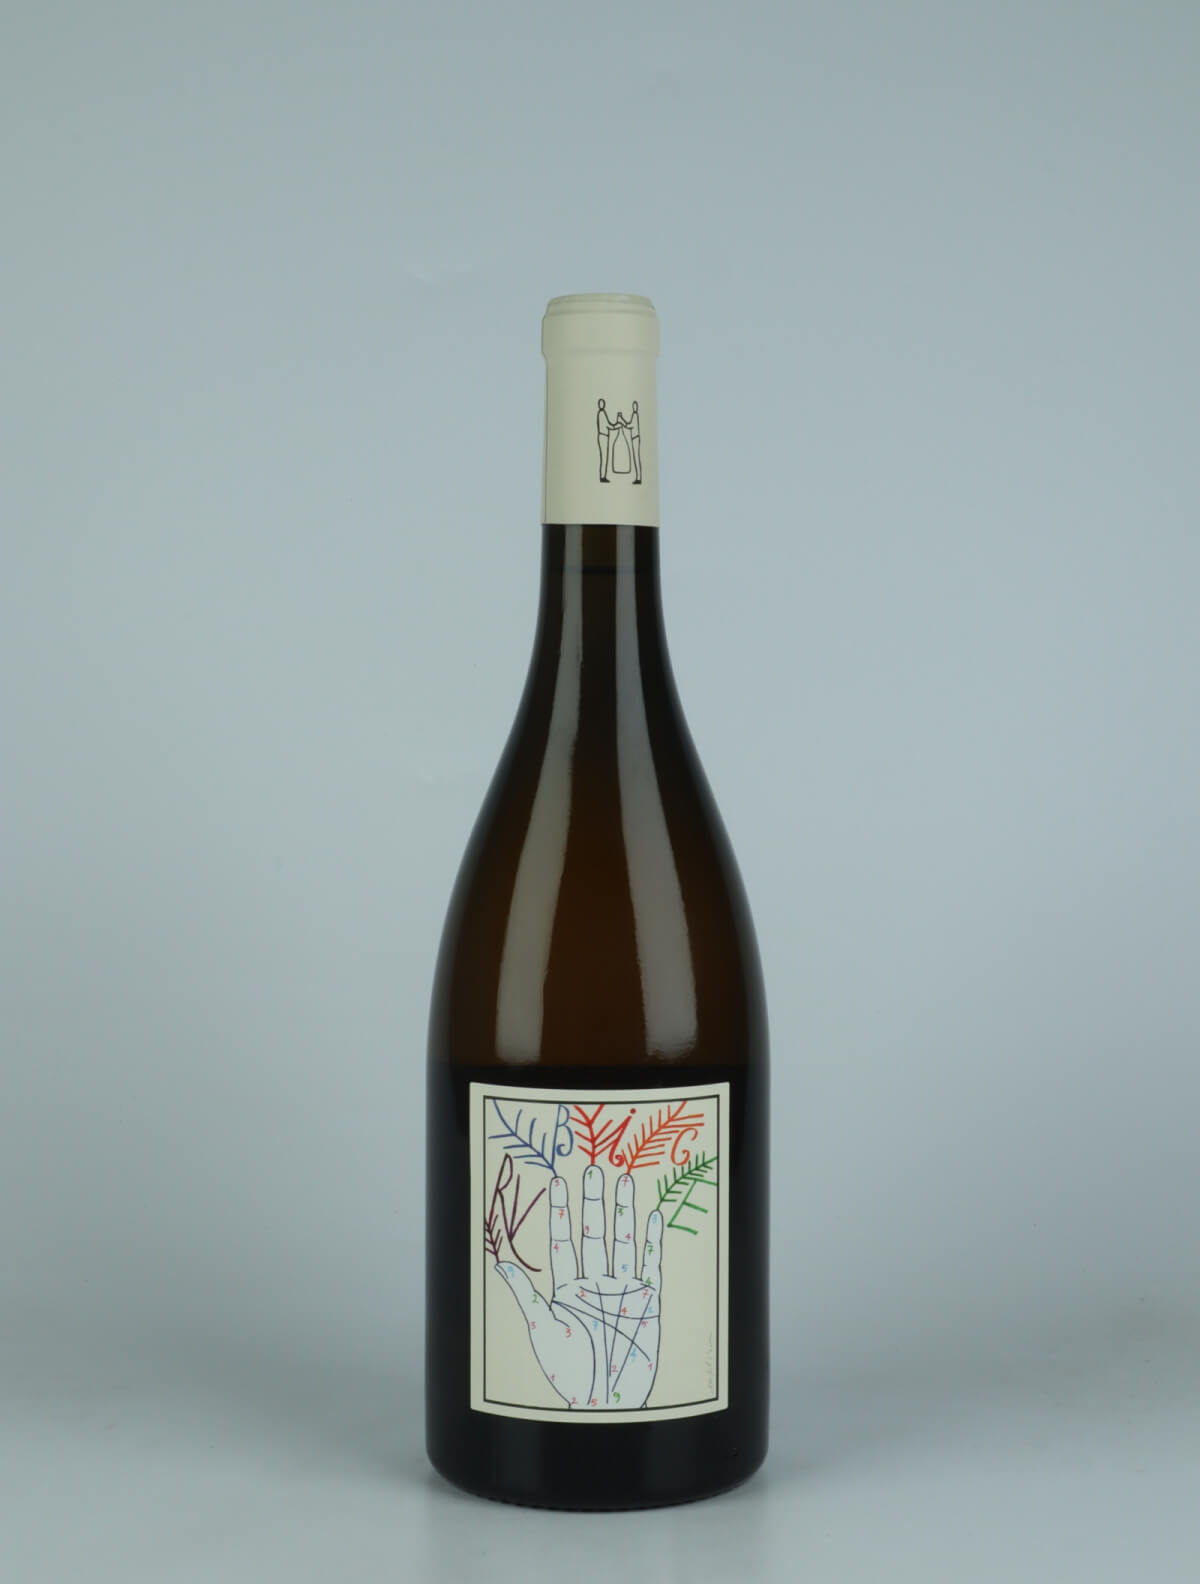 A bottle 2022 Rubice White wine from Marco Tinessa, Campania in Italy